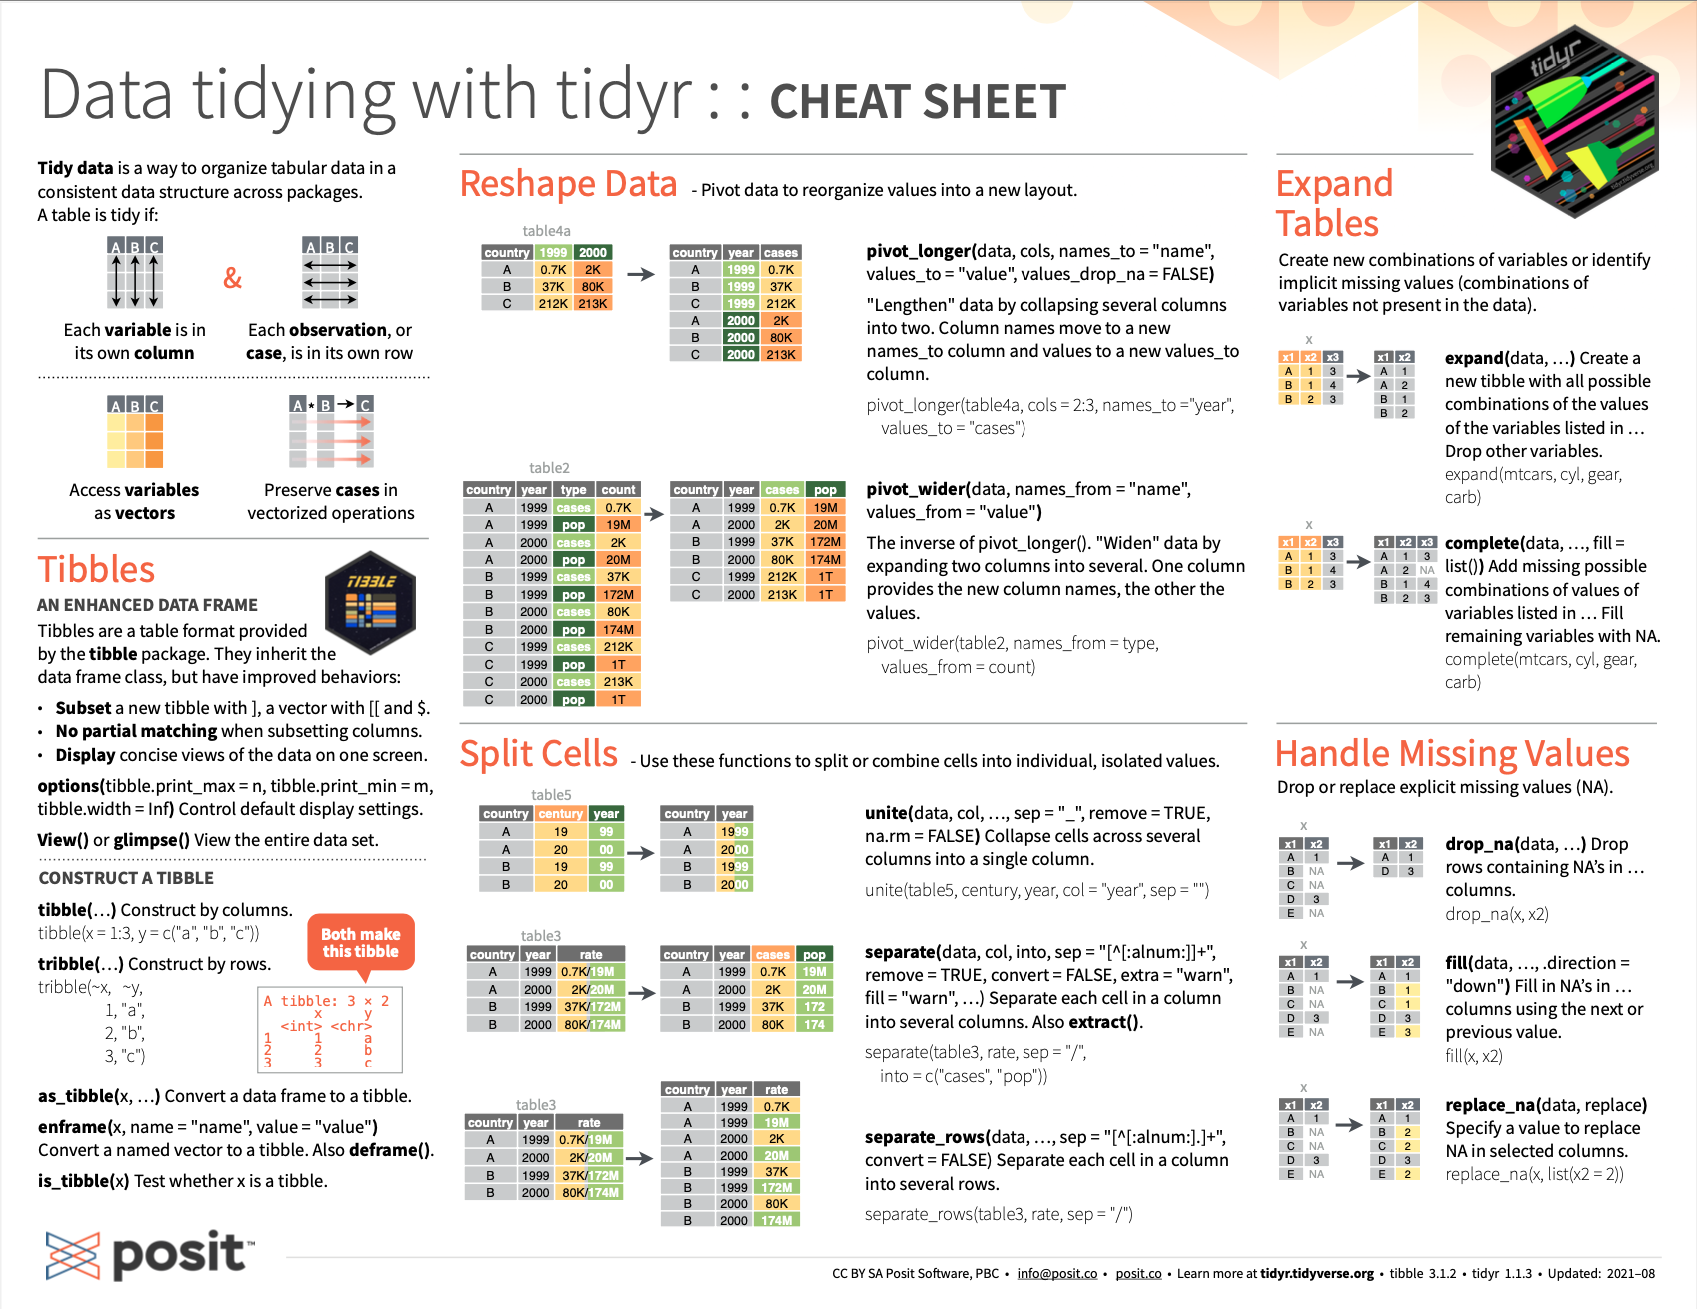 The RStudio cheatsheet on reshaping data with tidyr functions (on the back of the Data Import cheatsheet on the readr package).